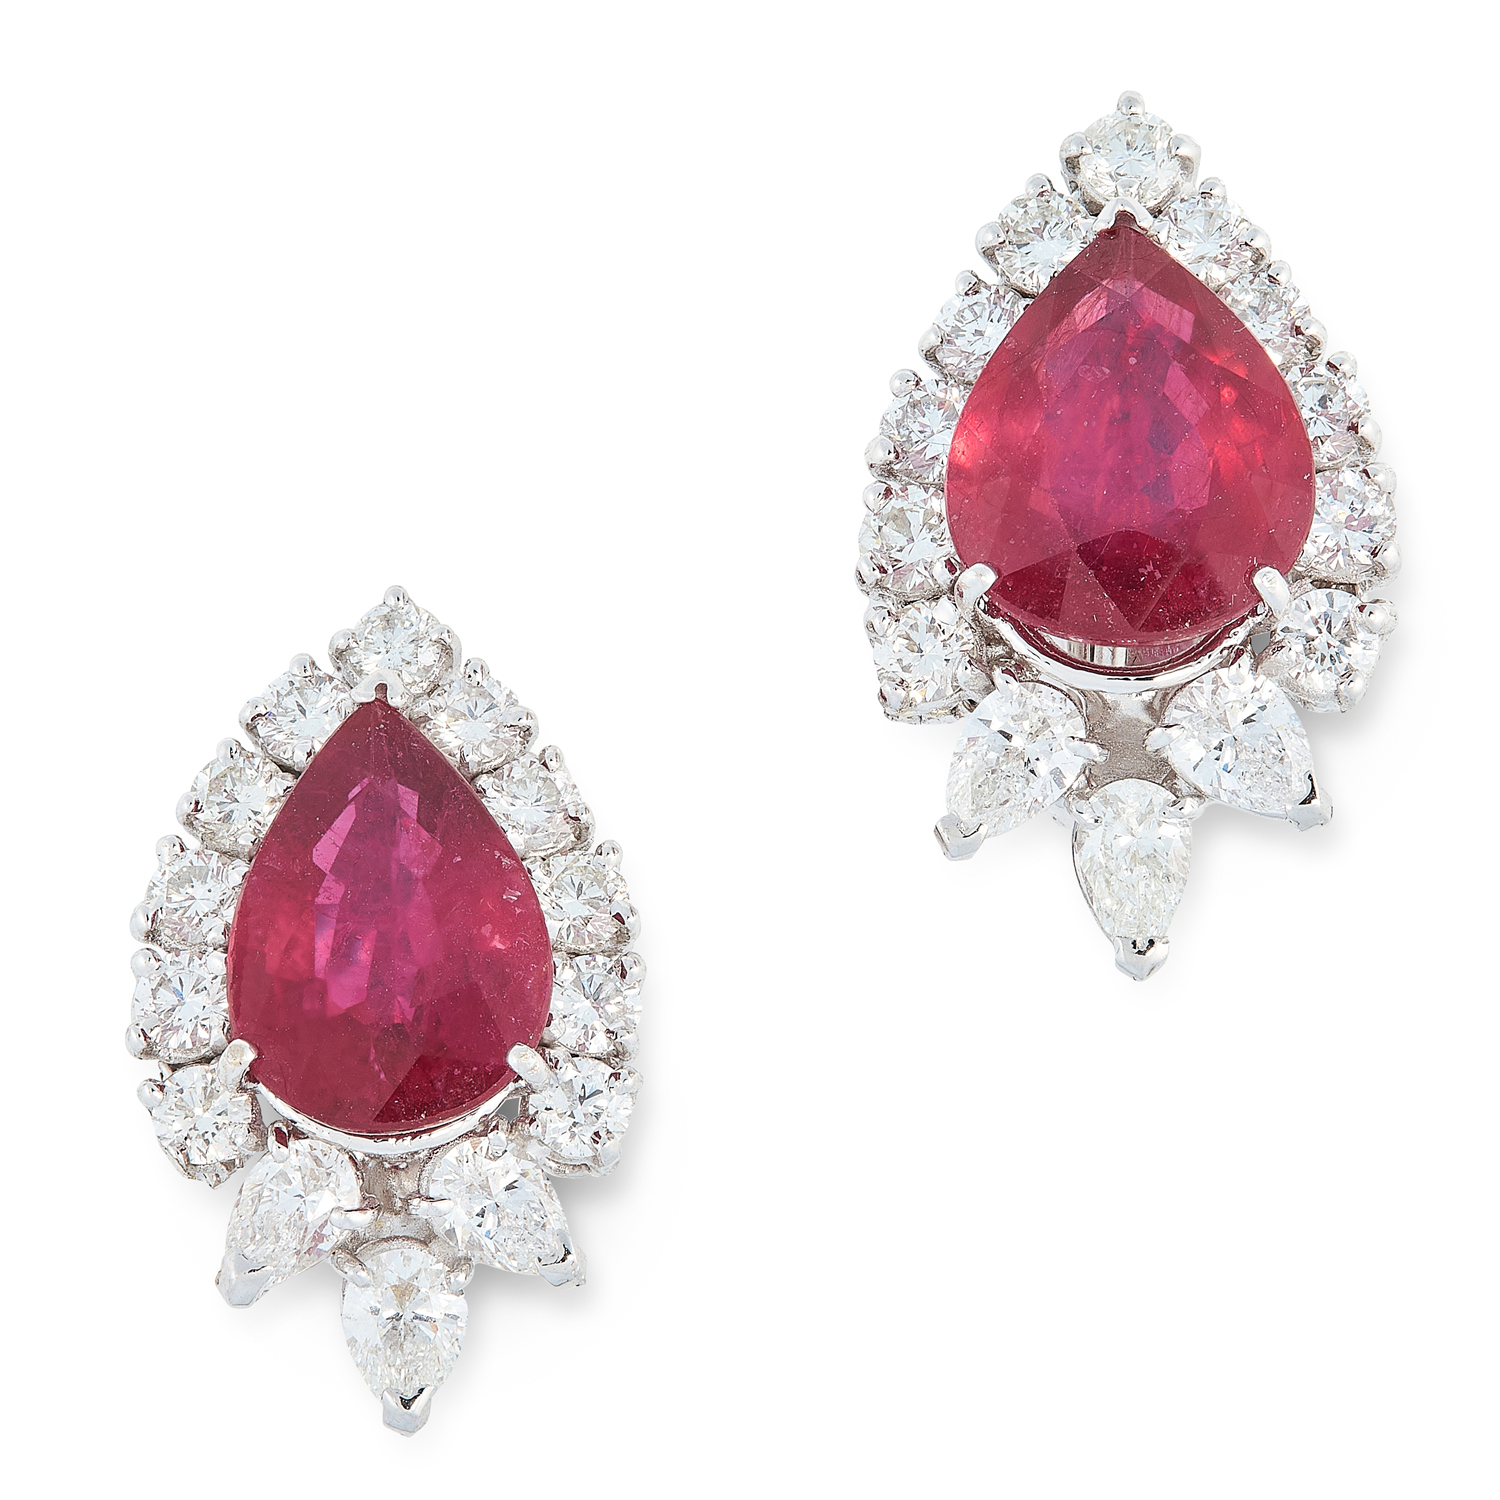 A PAIR OF RUBY AND DIAMOND EARRINGS each set with a pear cut ruby within a cluster of round and pear